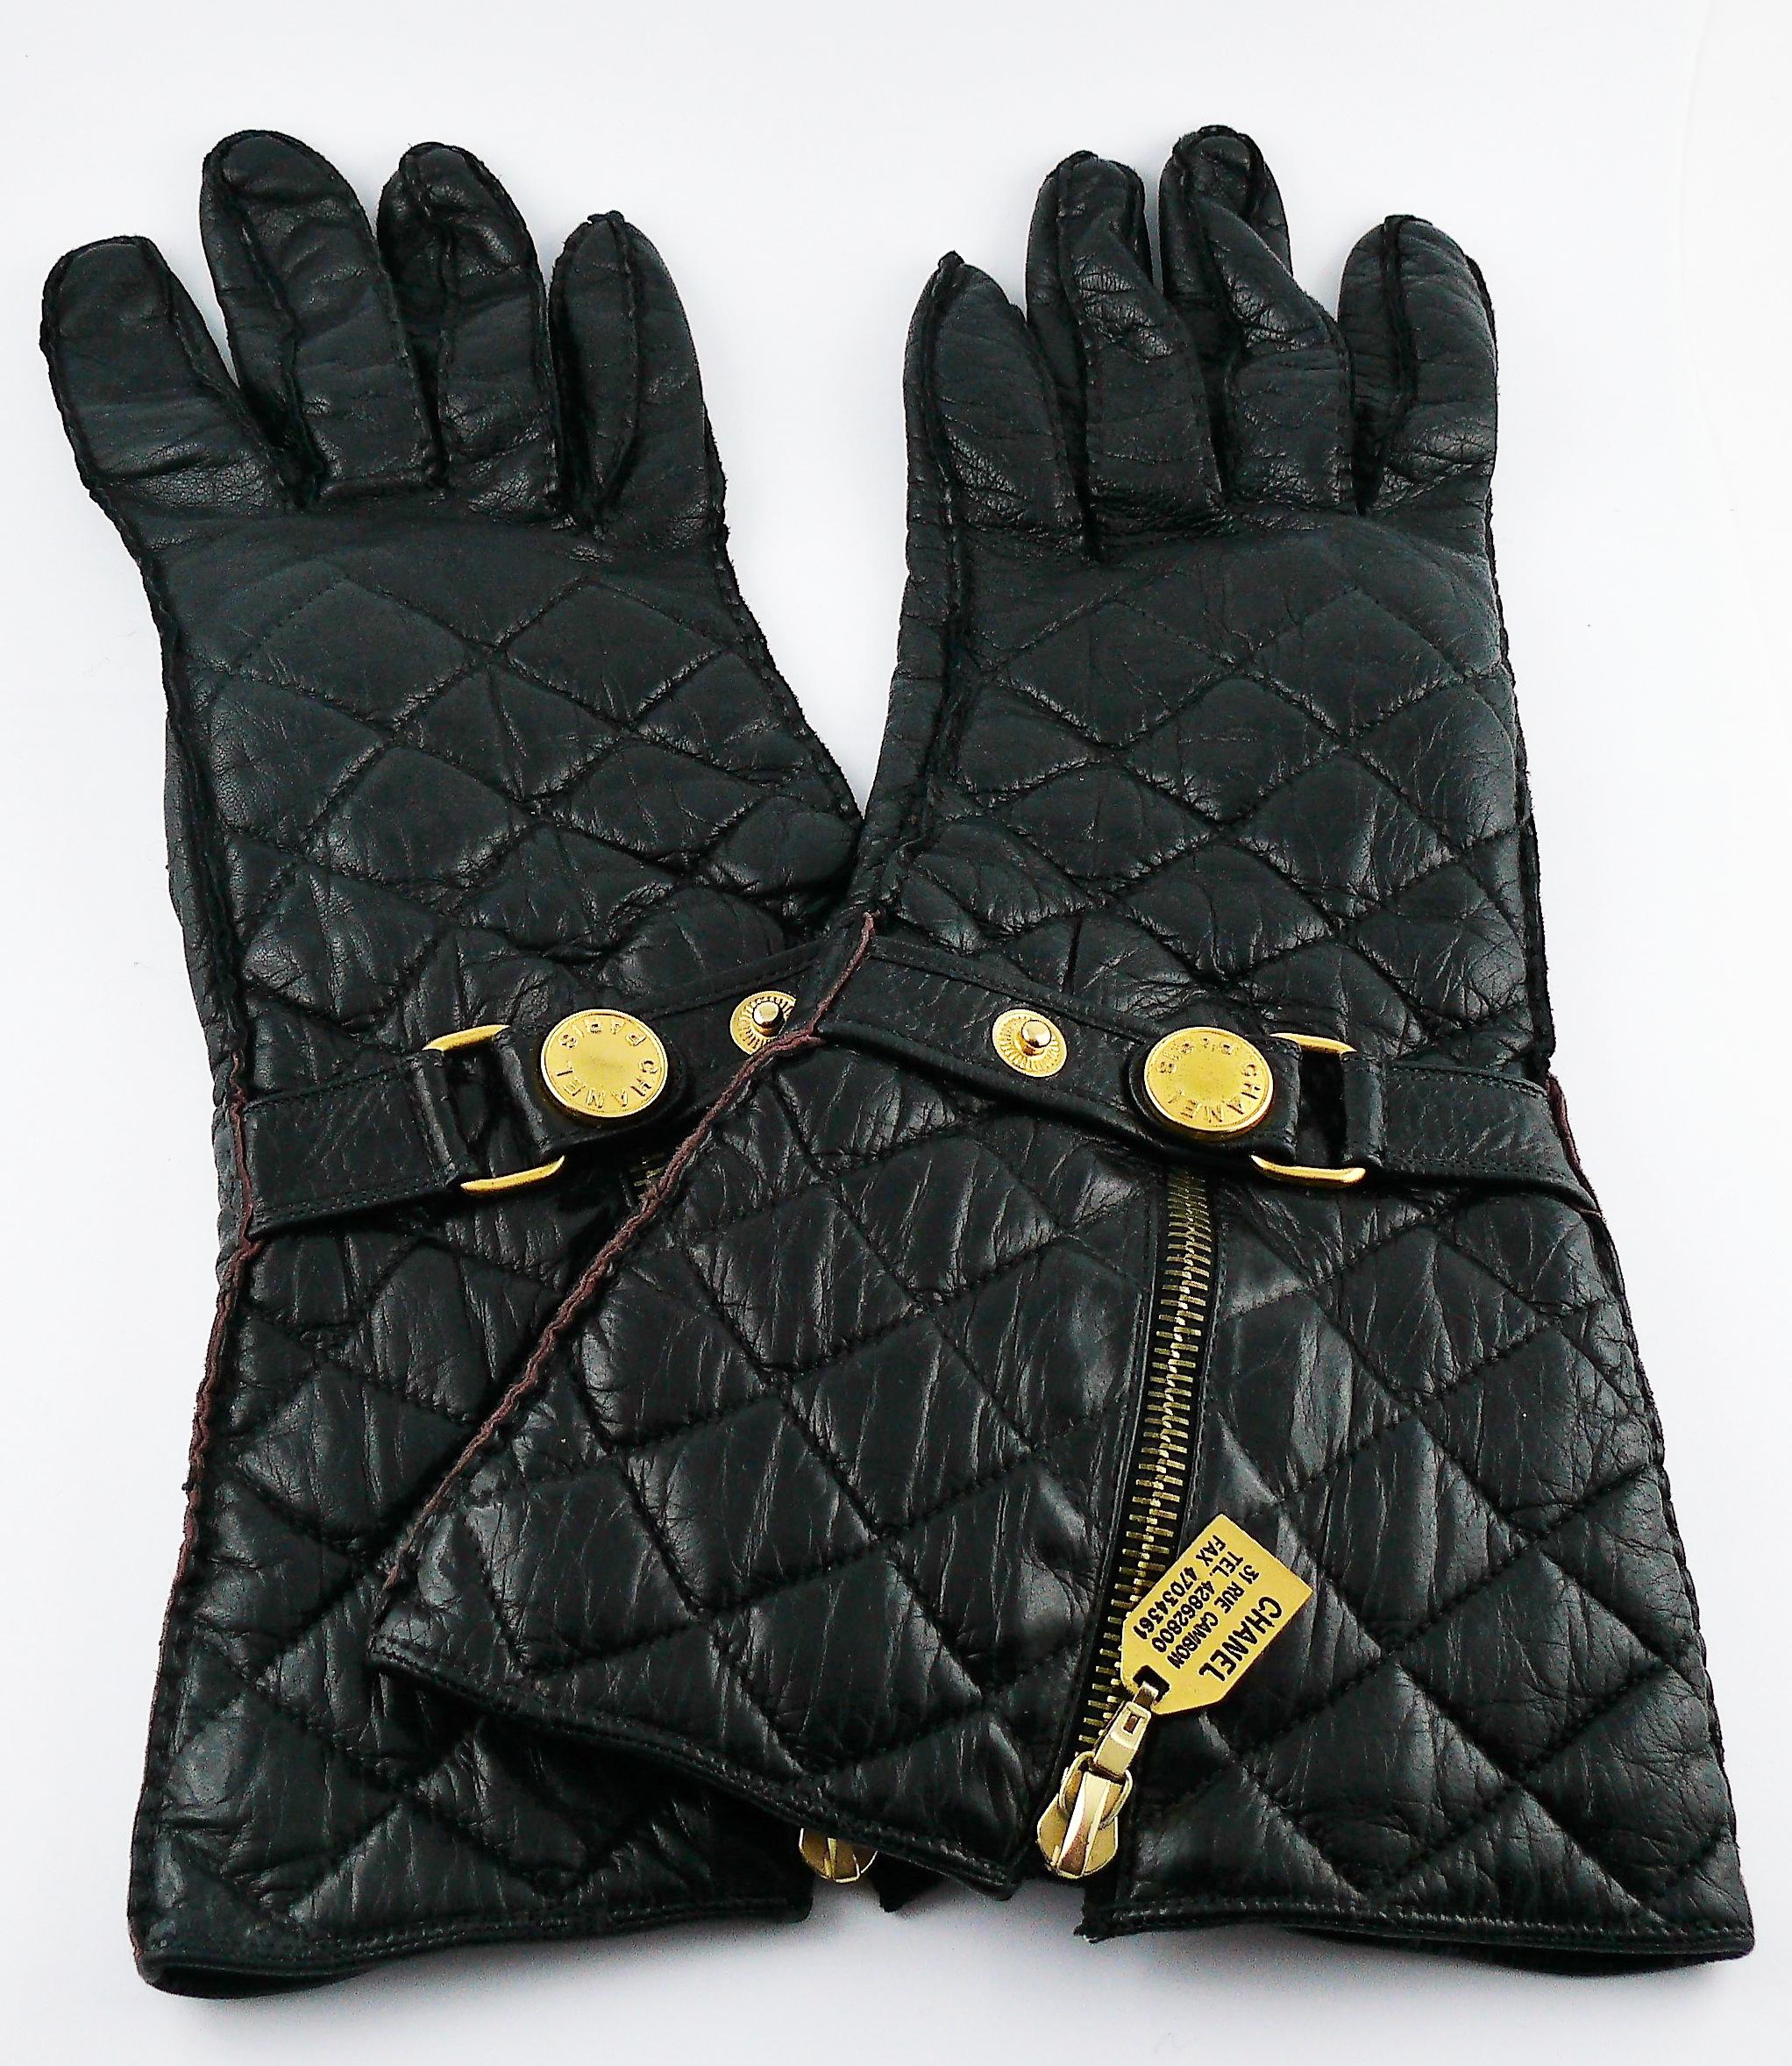 CHANEL vintage rare iconic black quilted kidskin leather long gloves.

Theses gloves feature :
- Front zipper closure with a pull embossed 31 Rue Cambon, telephone and fax numbers.
- Adjustable strap with snap button marked CHANEL PARIS.
- Quilted